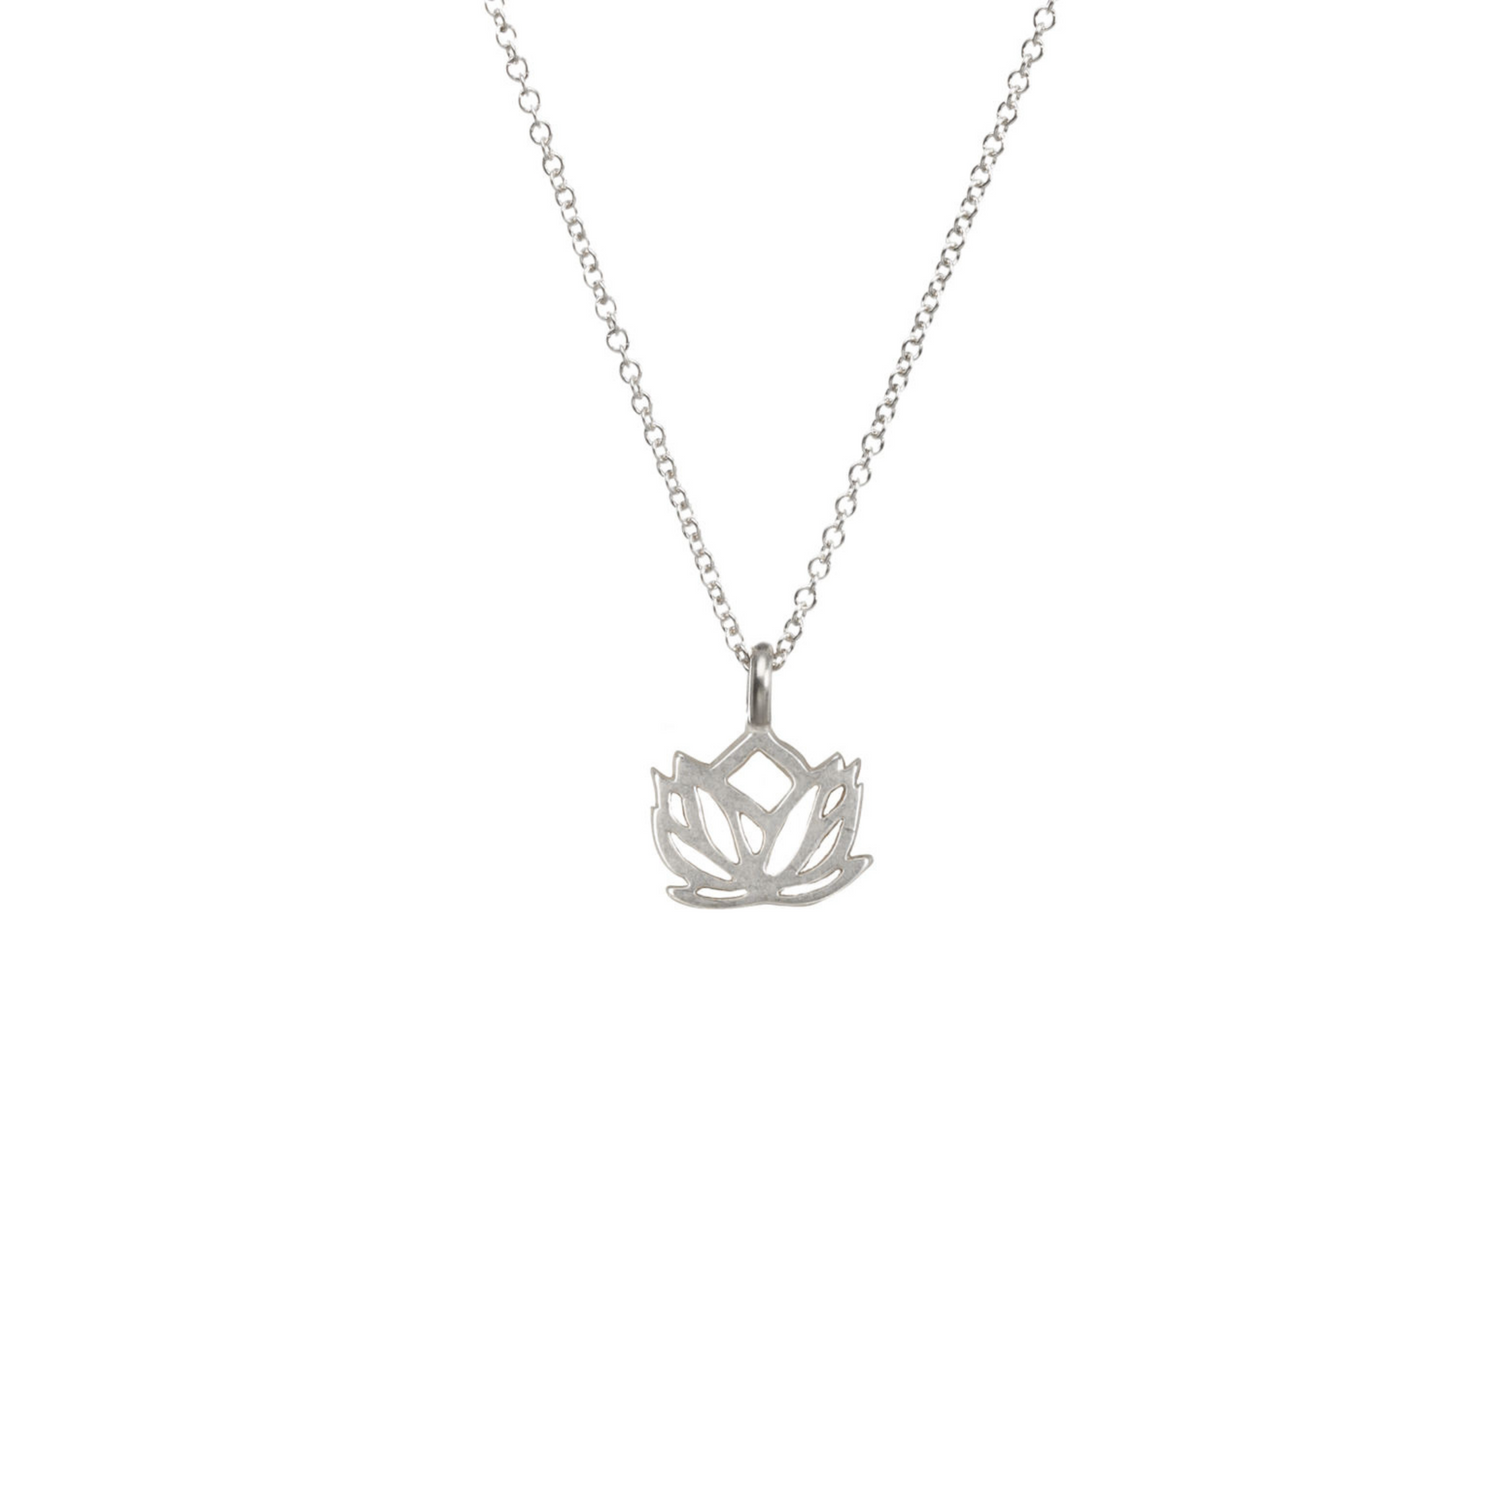 Lotus Necklace | Dogeared